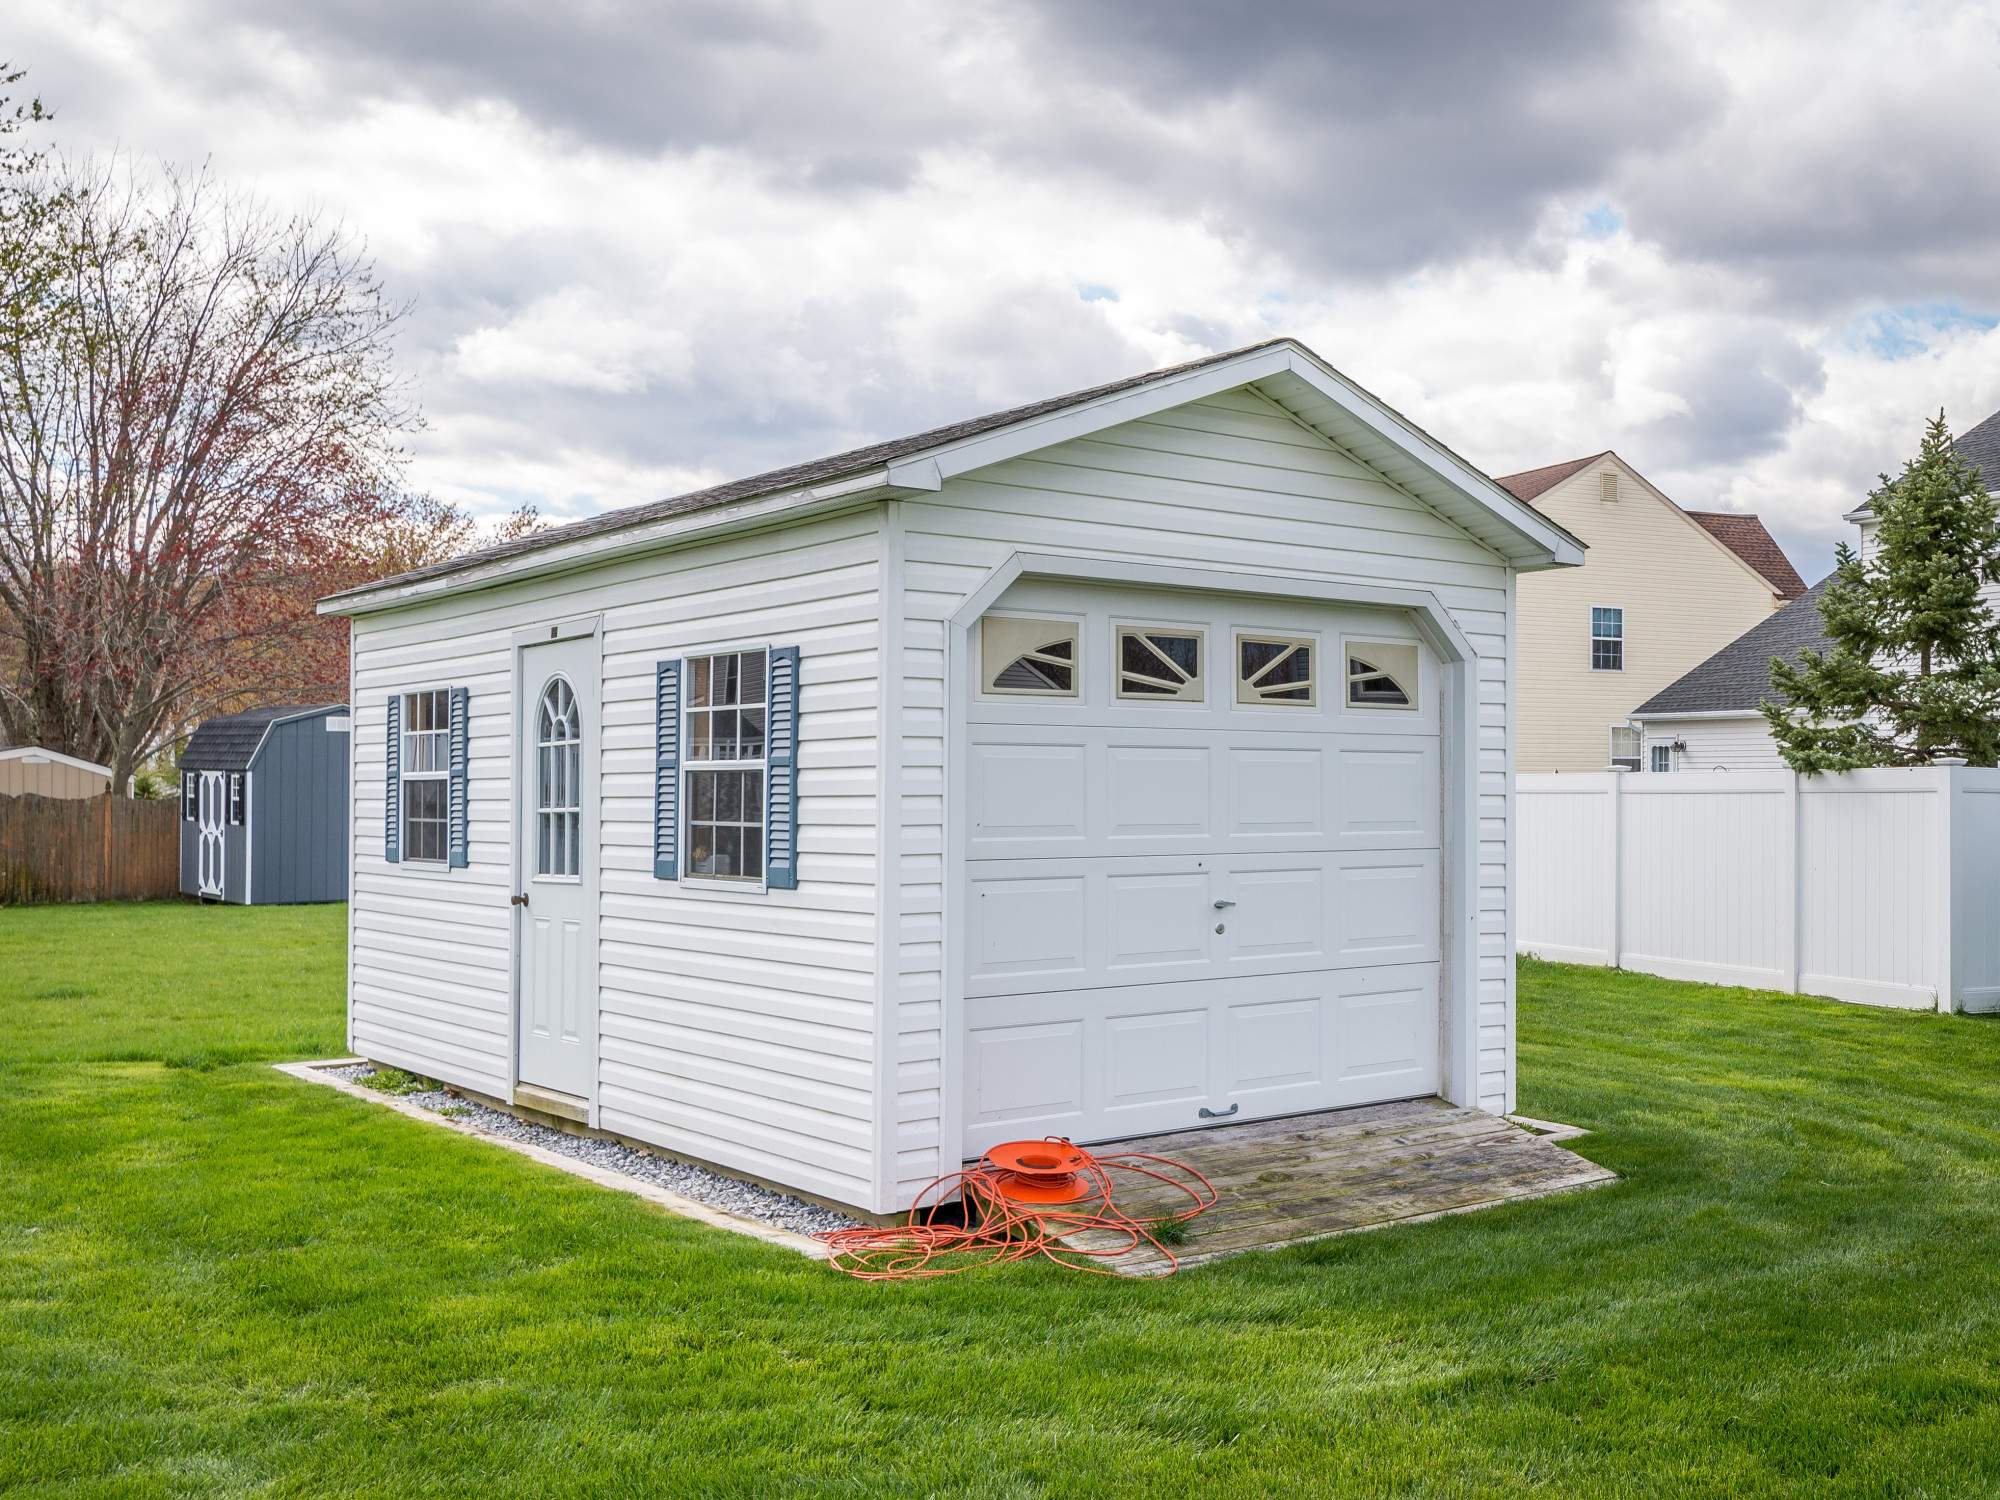 Choosing the Best Shed for Outdoor Storage